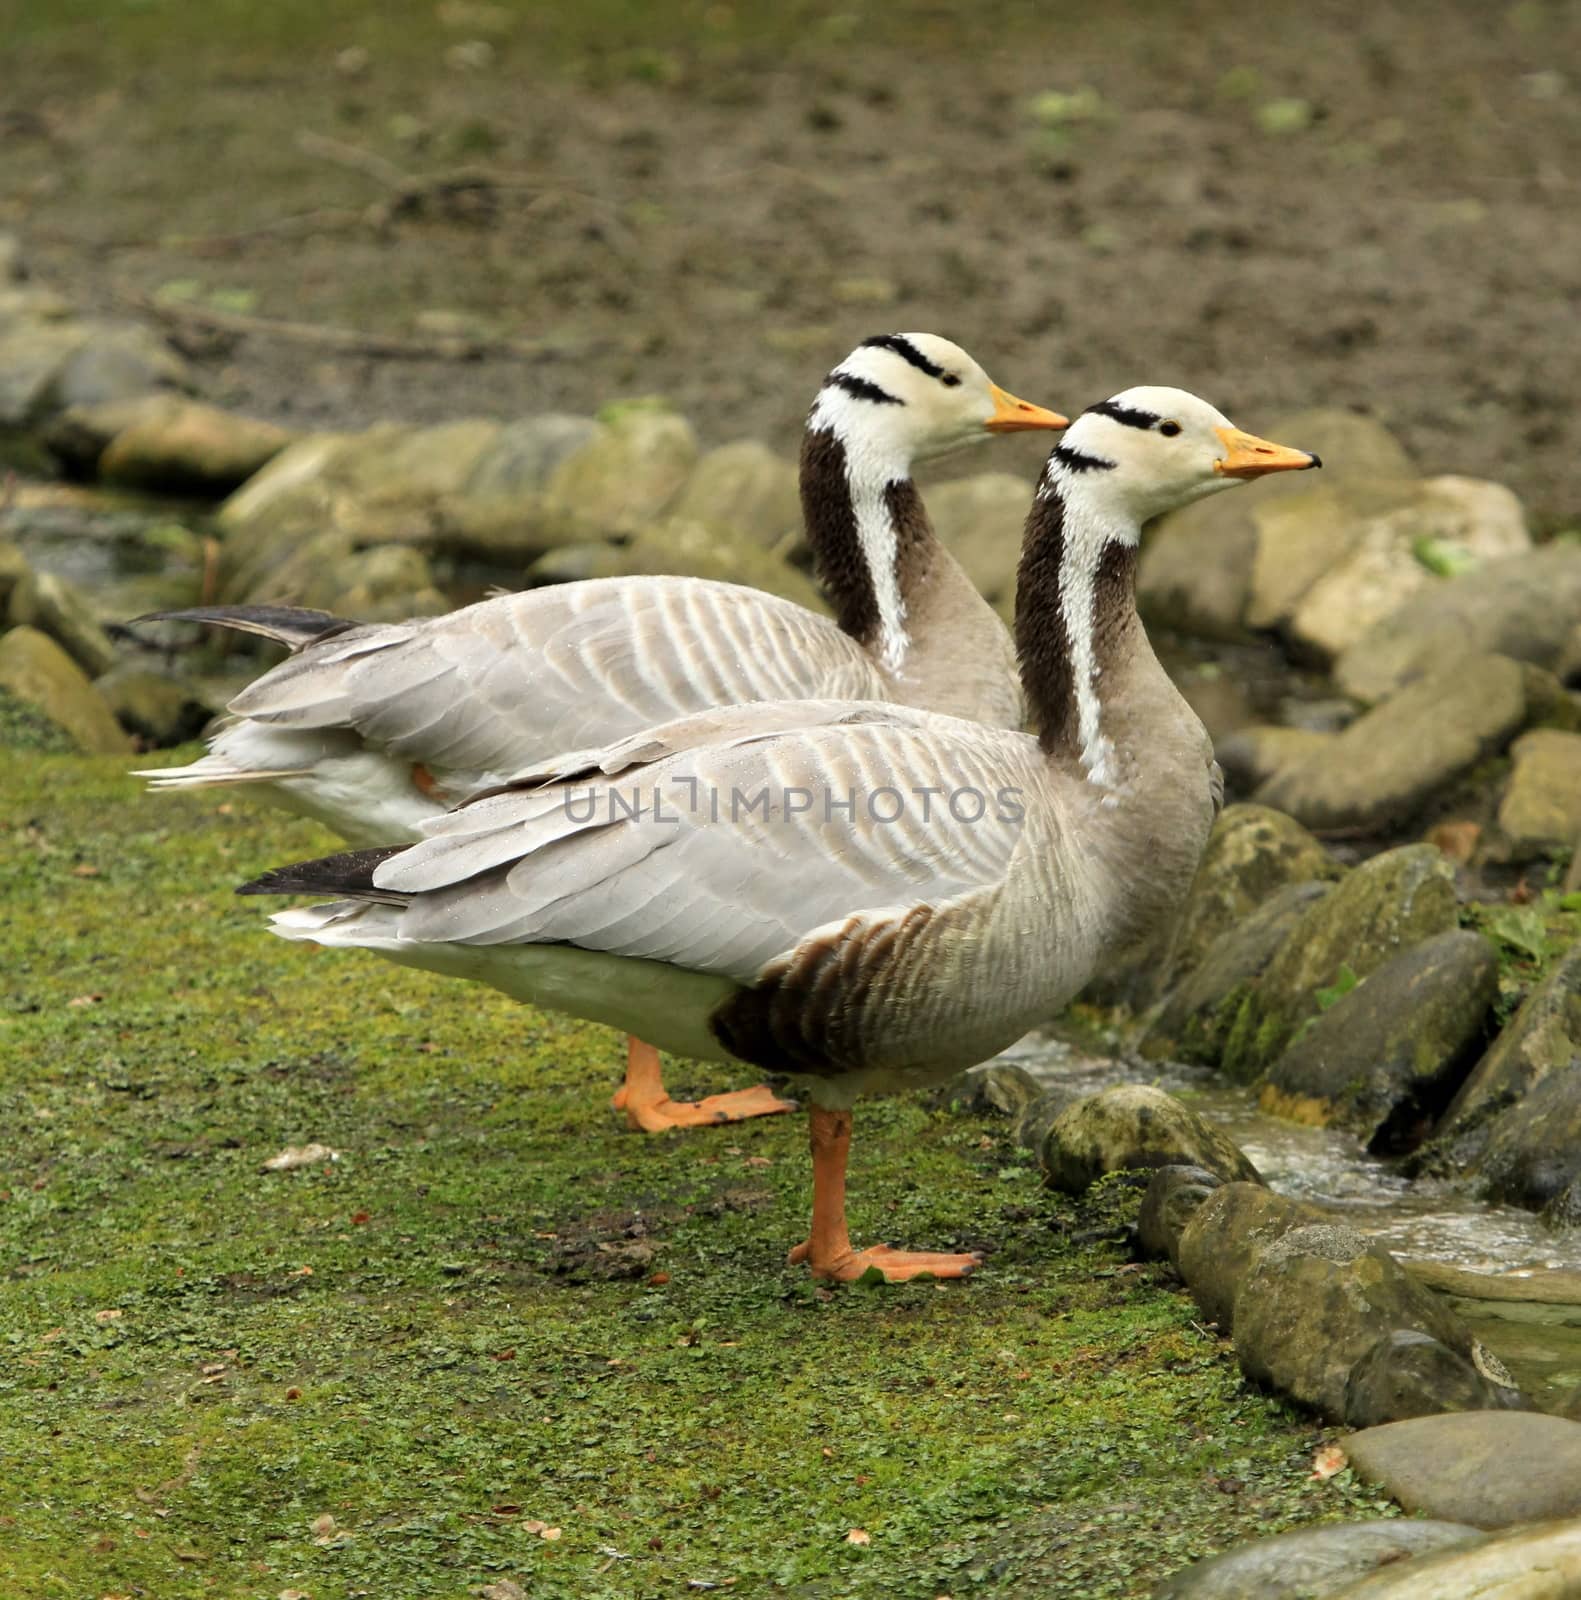 Two bar-headed gooses standing next to the other on the grass in front of rocks